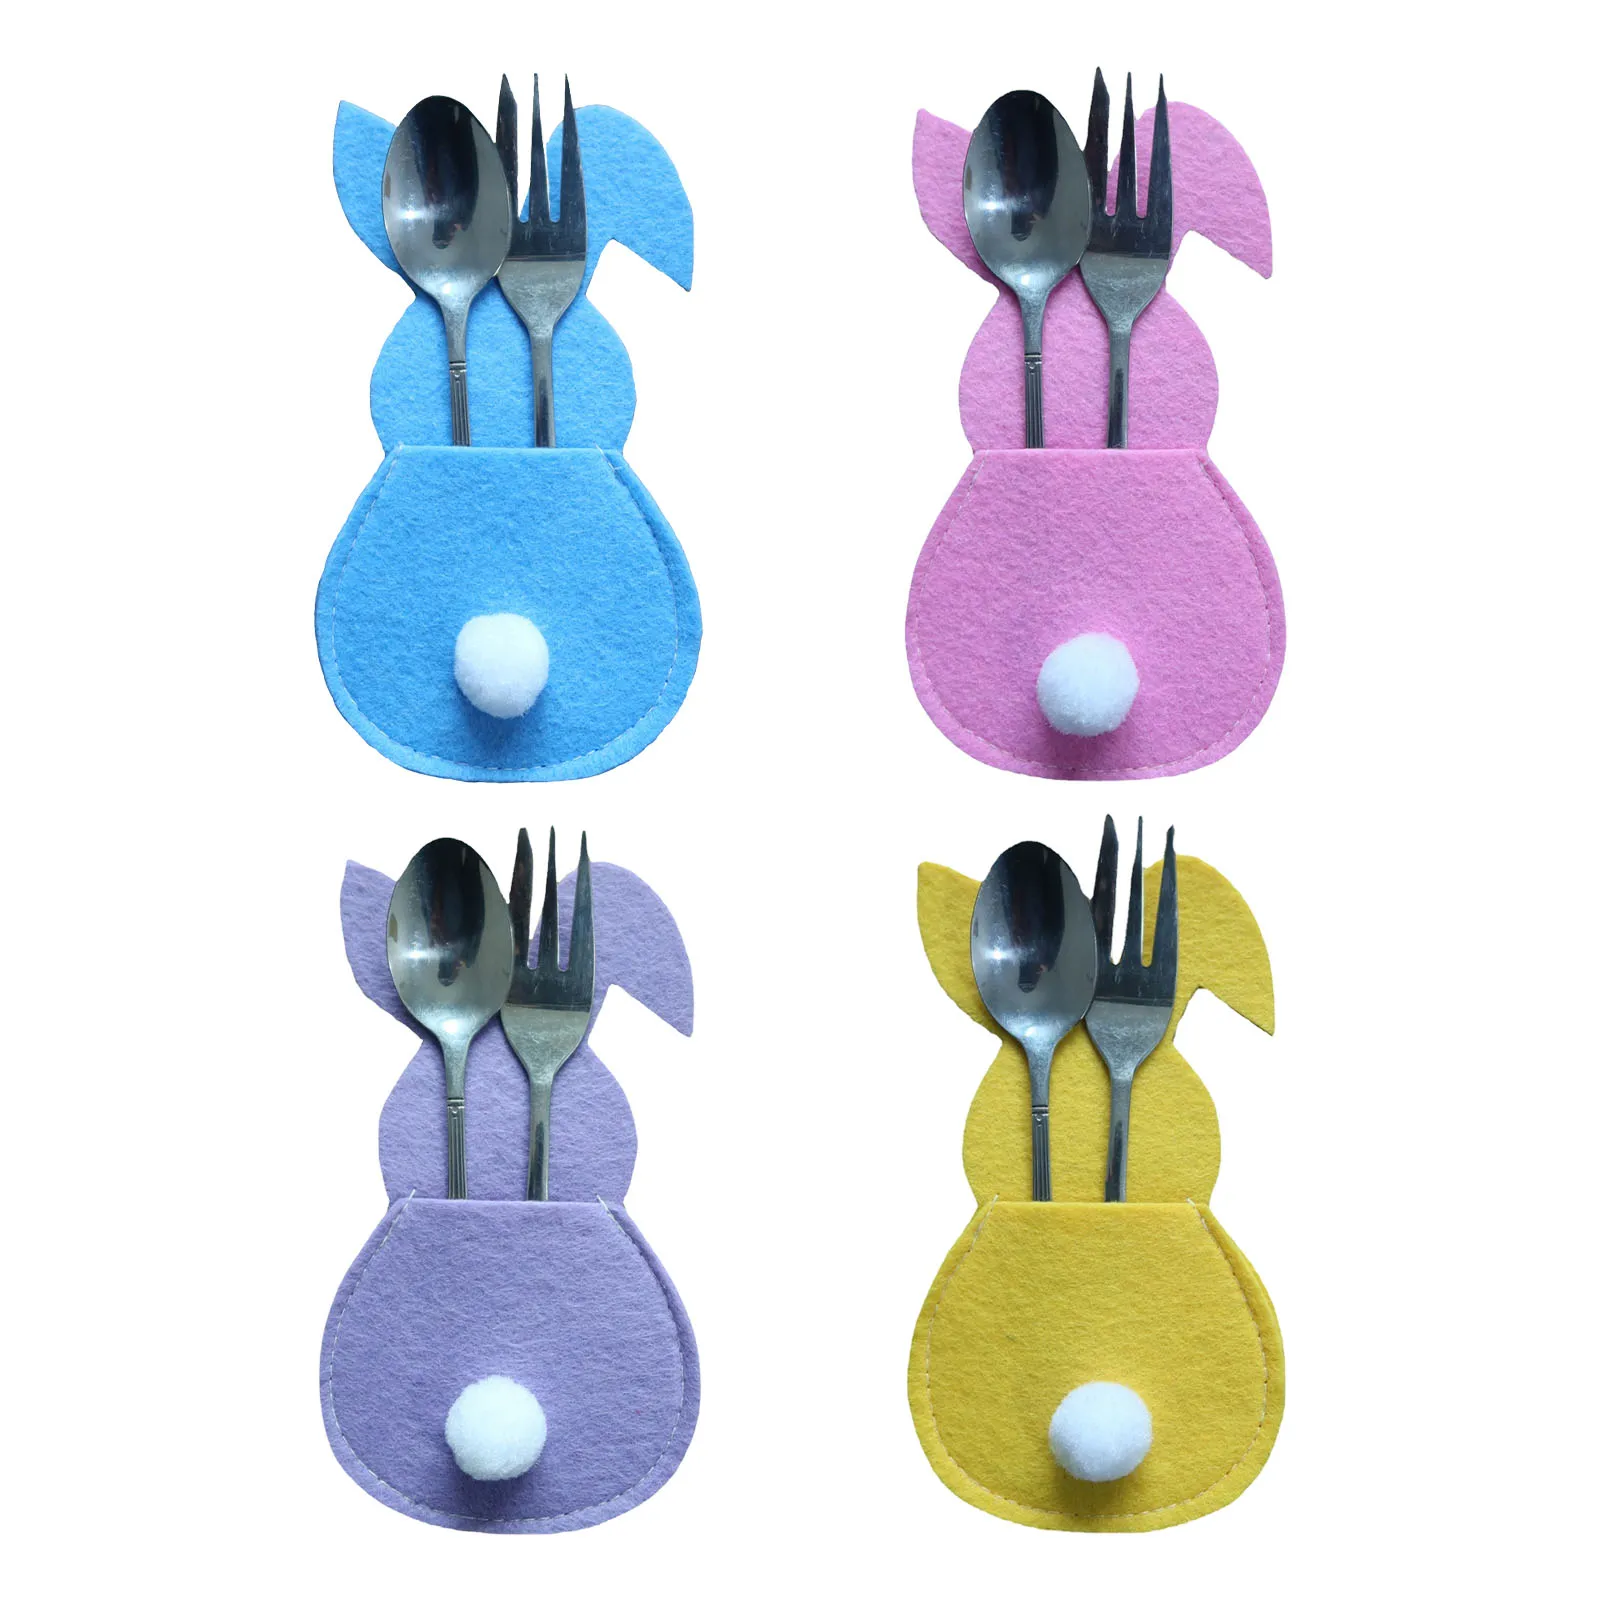 

Easter Rabbit Cutlery Pouch Bag 4PCS Bunny Cloth Flatware Silverware Holder Home Kitchen Tableware Utensil Easter Decoration